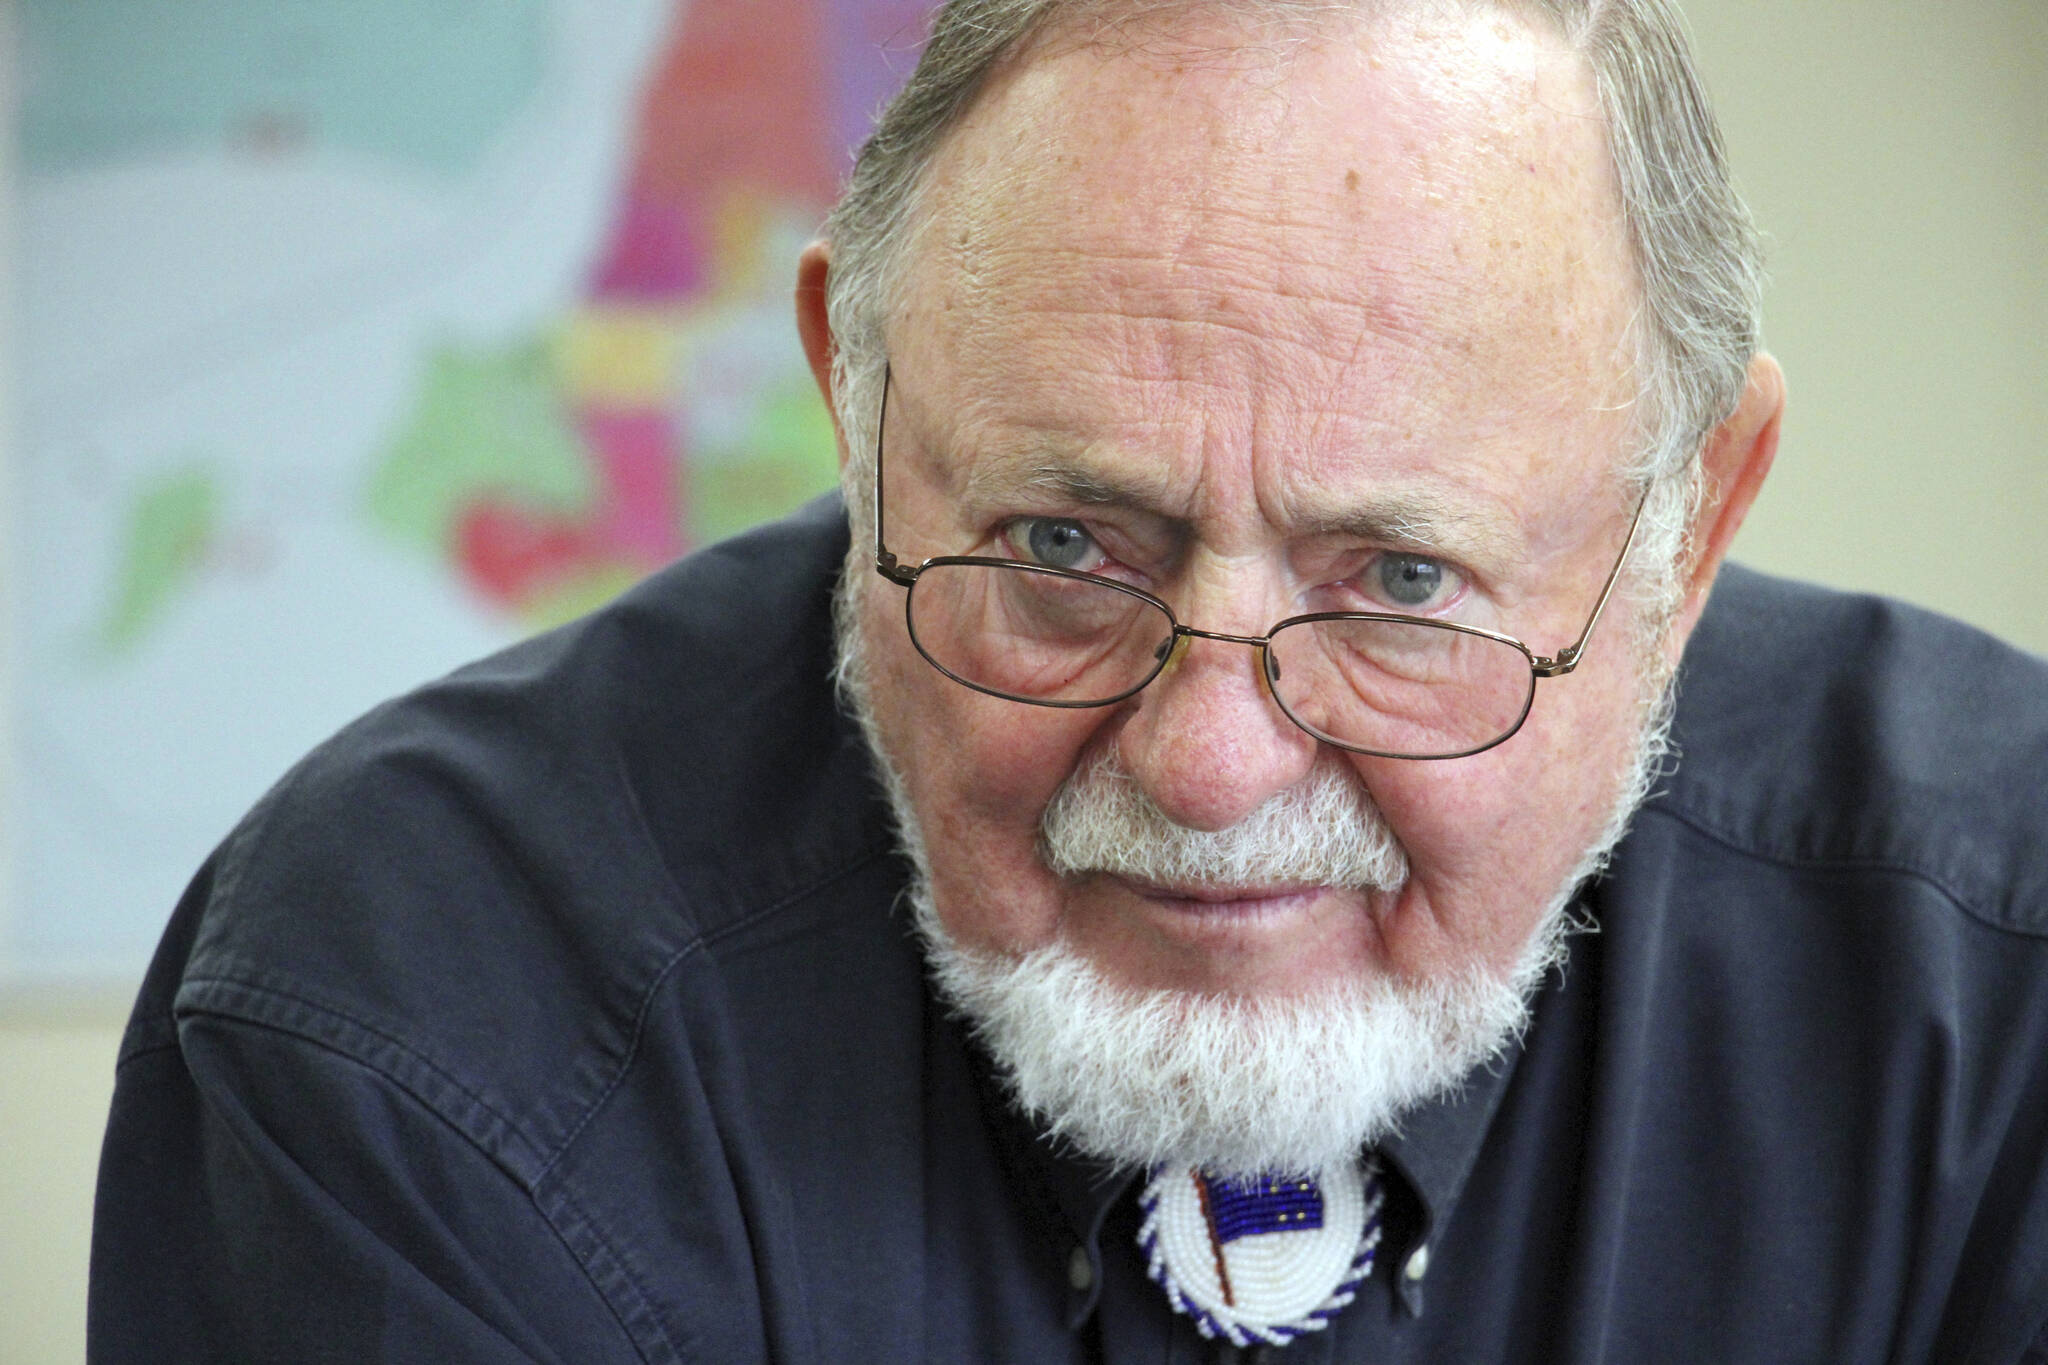 U.S. Rep. Don Young answers a reporter’s question after filing paperwork for reelection at the Alaska Division of Elections in Anchorage, Alaska. Young, the longest-serving member of Alaska’s congressional delegation, died Friday, March 18, 2022. He was 88. (AP Photo / Mark Thiessen)